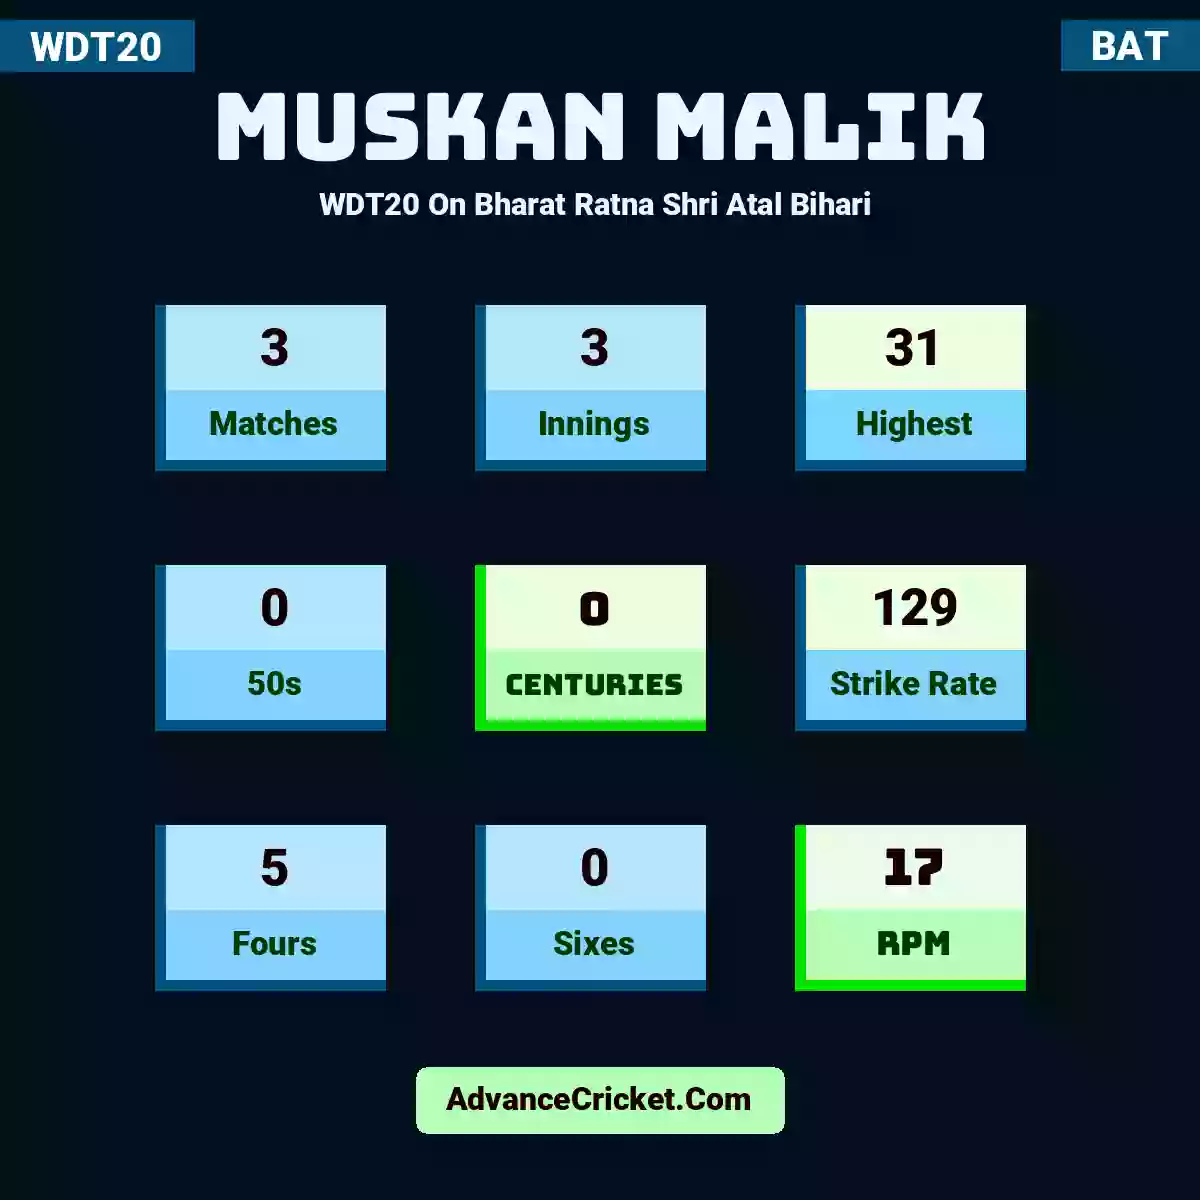 Muskan Malik WDT20  On Bharat Ratna Shri Atal Bihari , Muskan Malik played 3 matches, scored 31 runs as highest, 0 half-centuries, and 0 centuries, with a strike rate of 129. M.Malik hit 5 fours and 0 sixes, with an RPM of 17.